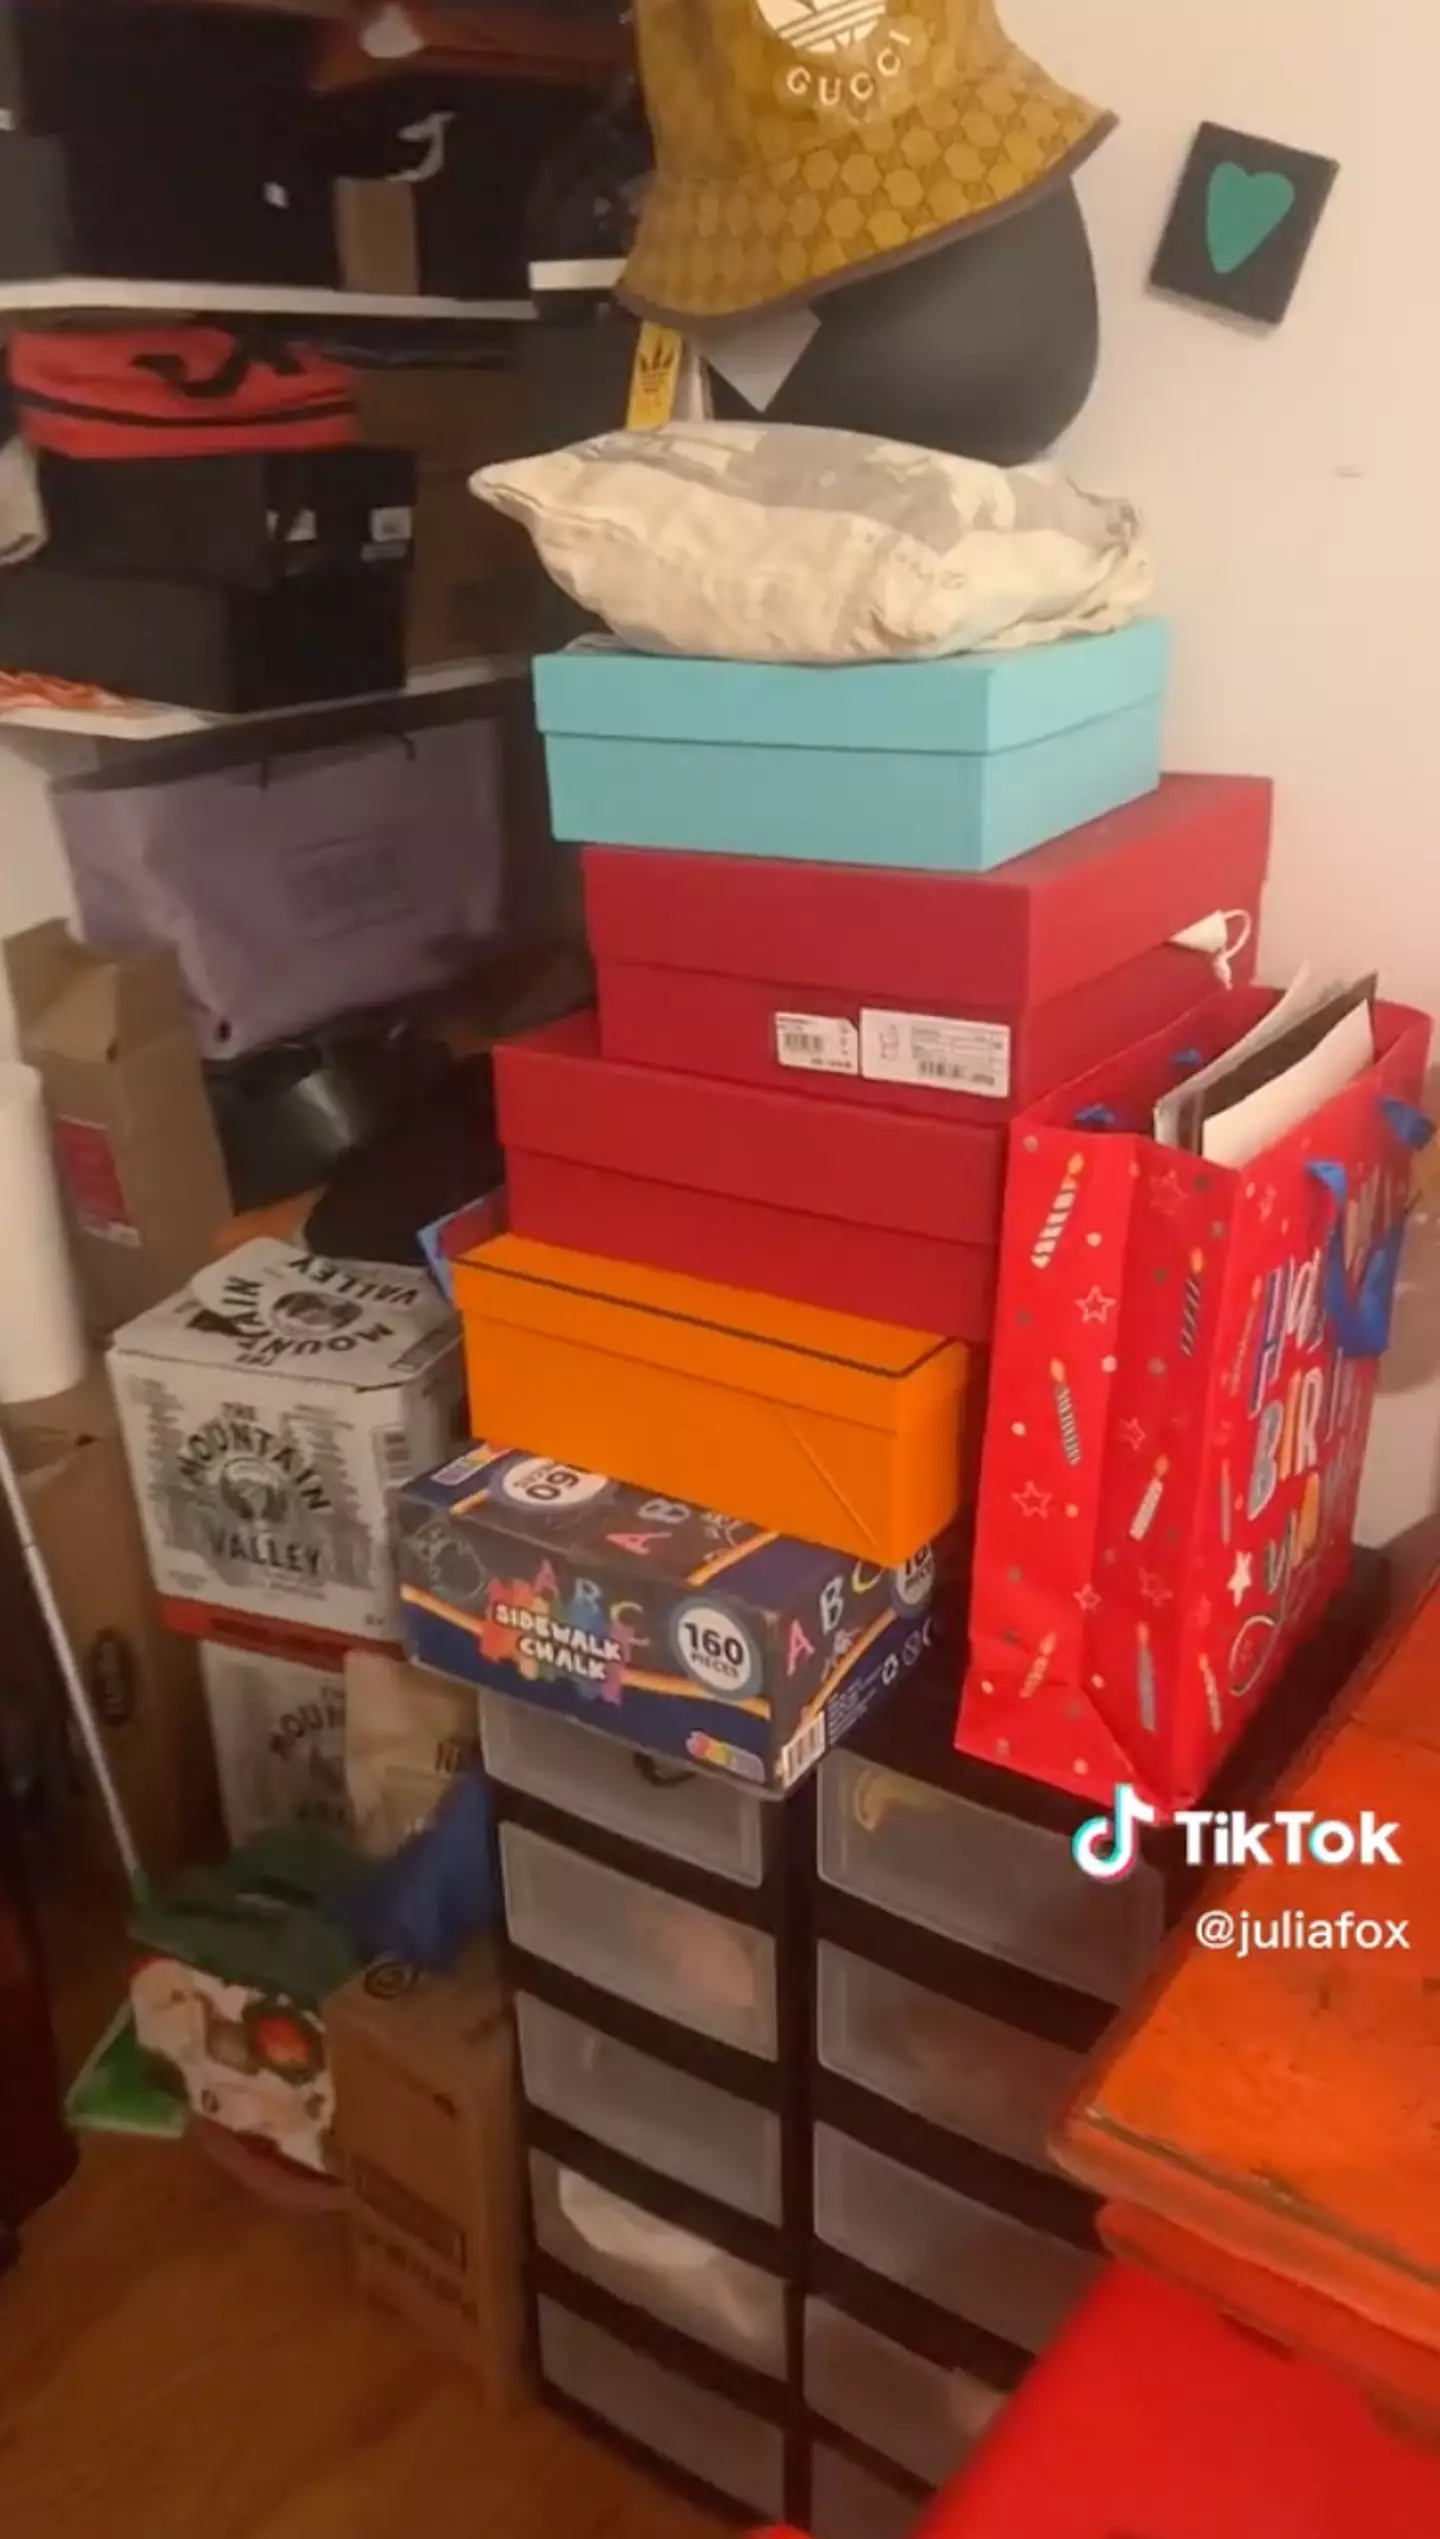 Complete with shoeboxes?